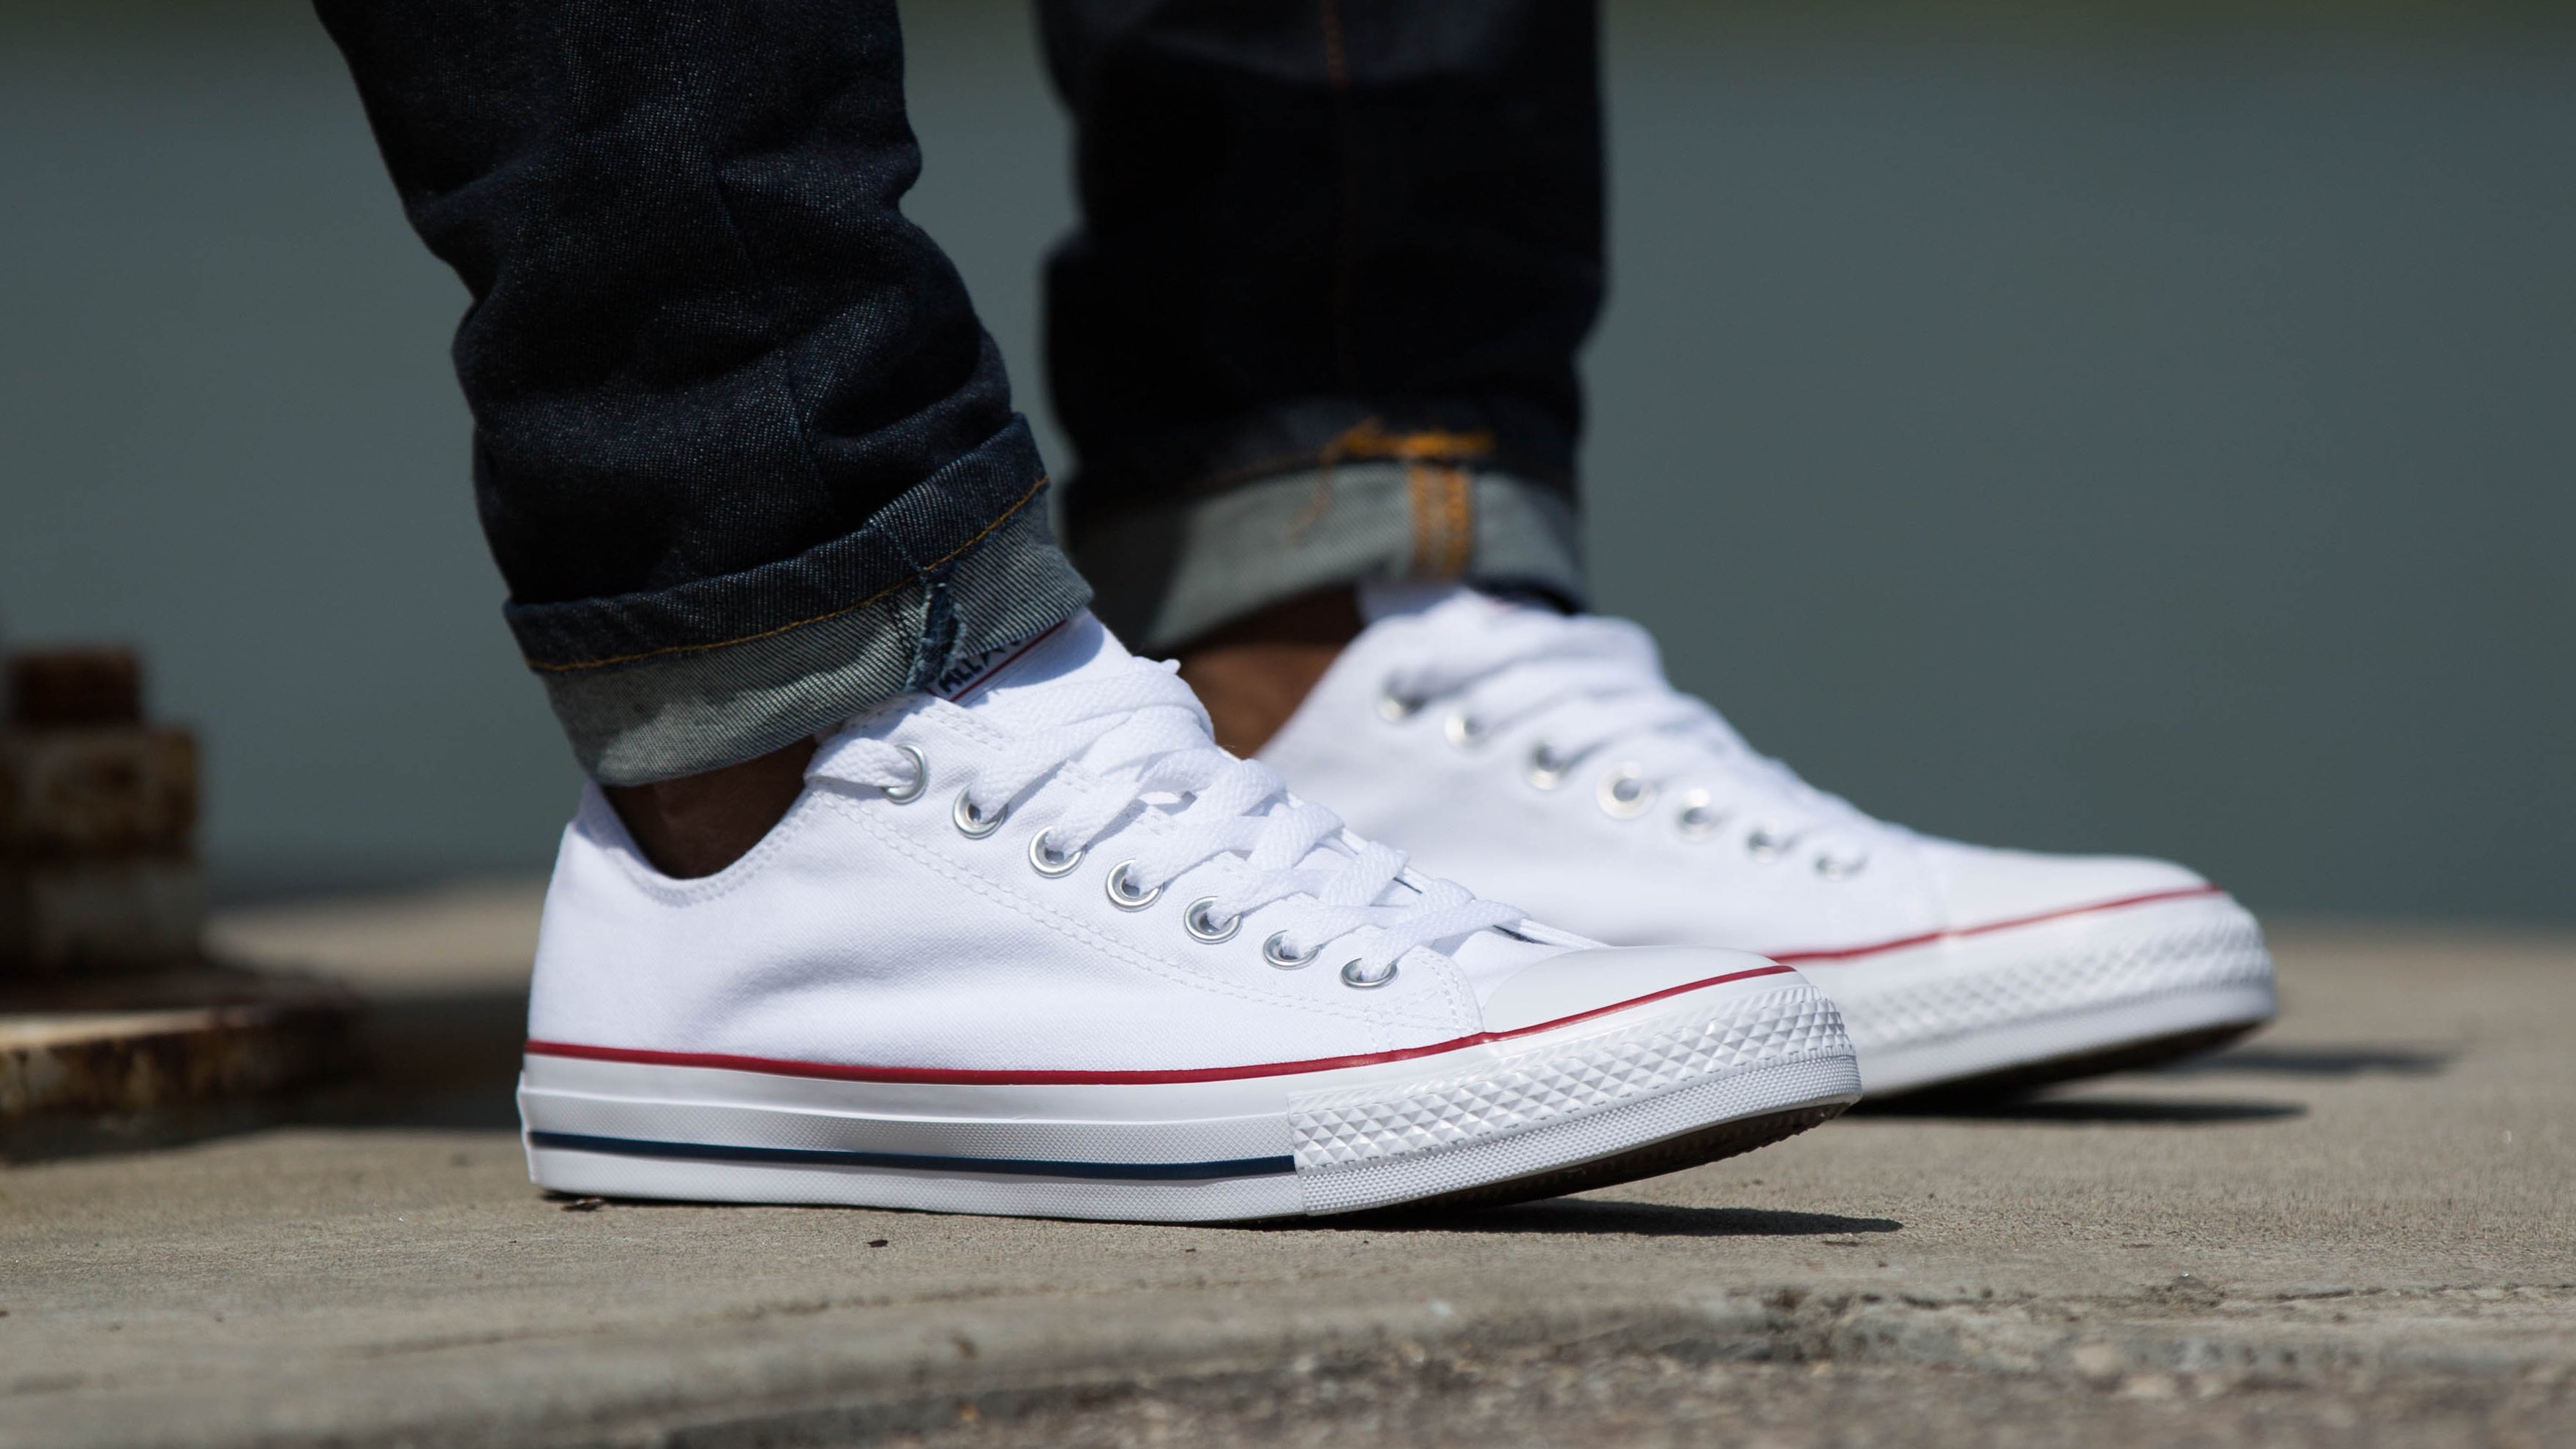 Foot Locker Canada on Twitter: Converse Chuck Taylor All white, available in full family sizing, in select stores &amp; online 👉 https://t.co/ngF475XCG3 #Approved / Twitter